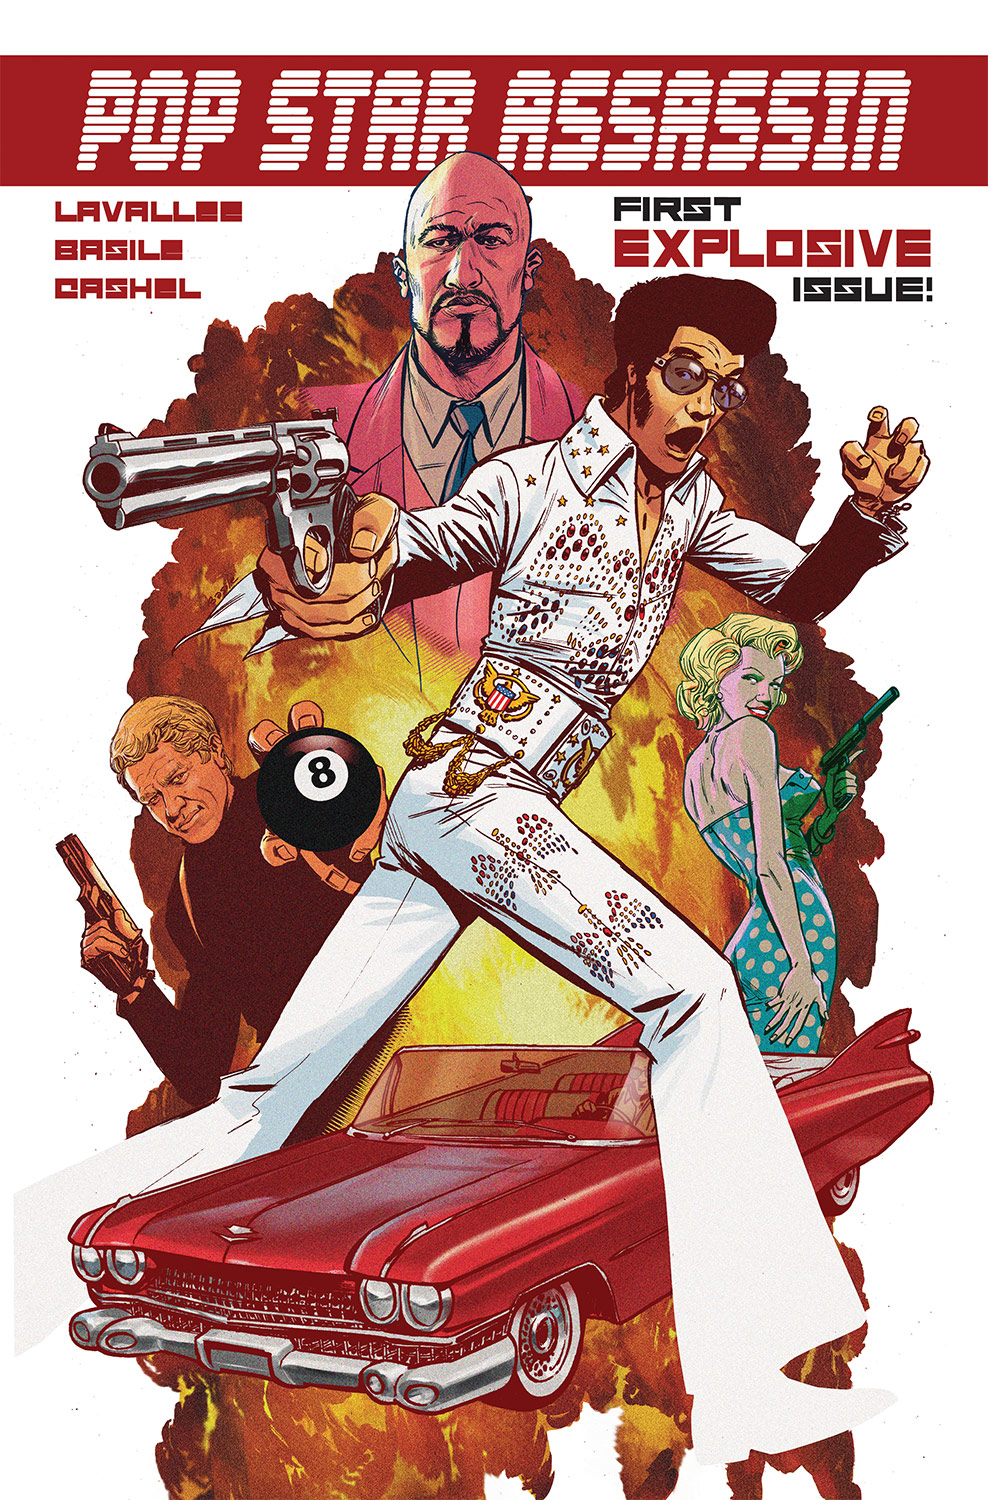 Pop Star Assassin #1 Cover A Basile (Mature) (Of 6)